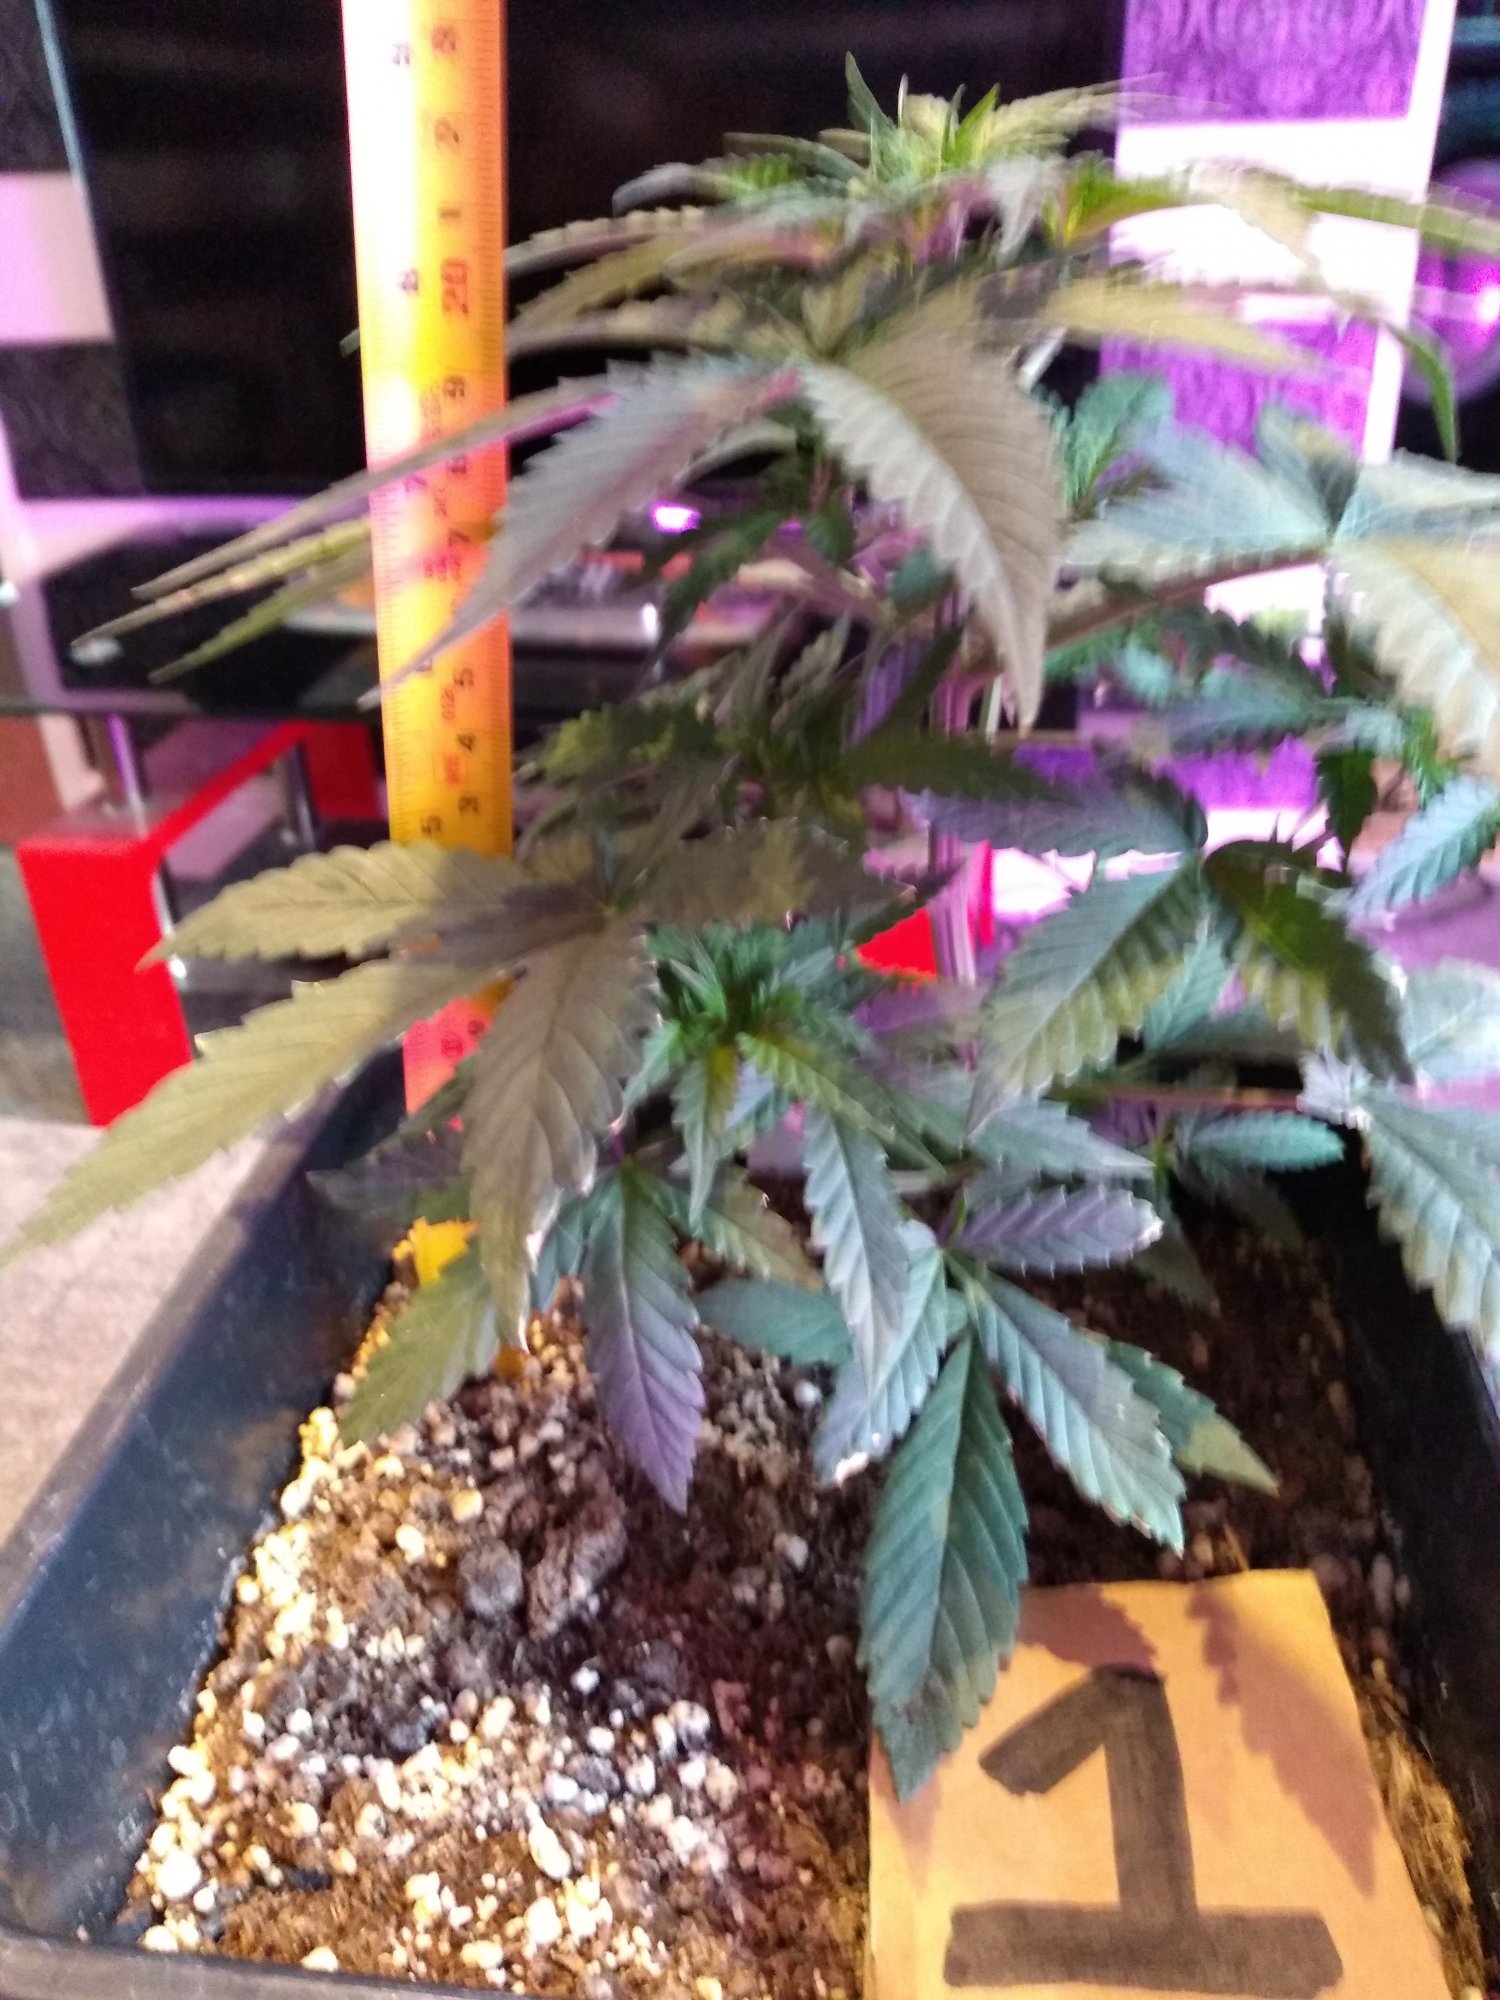 New grower   mistakes have been made 9